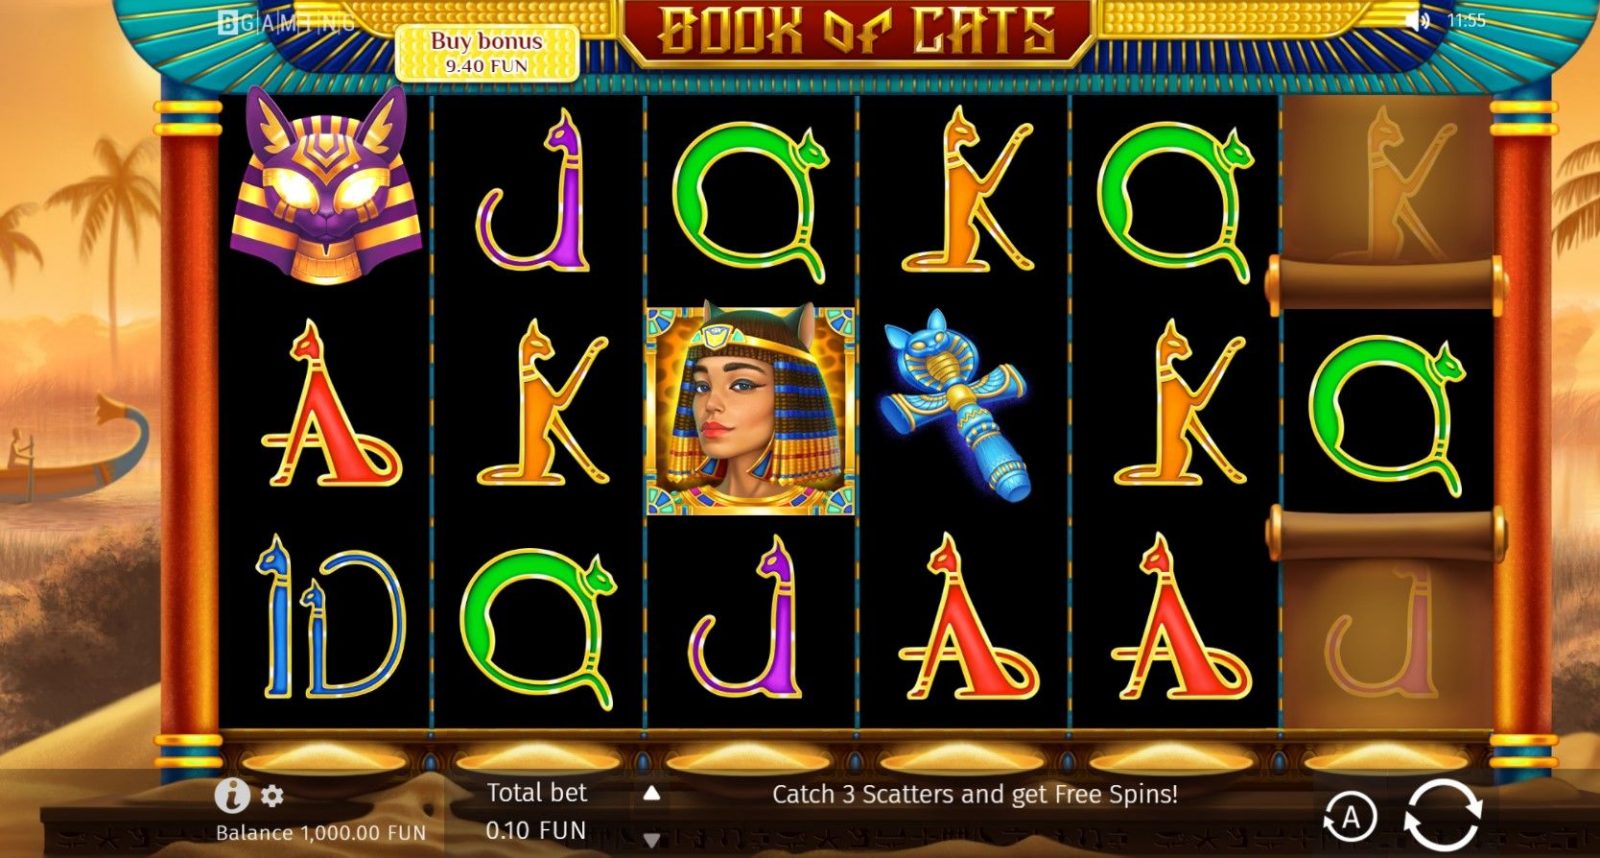 book-of-cats-slot-demo